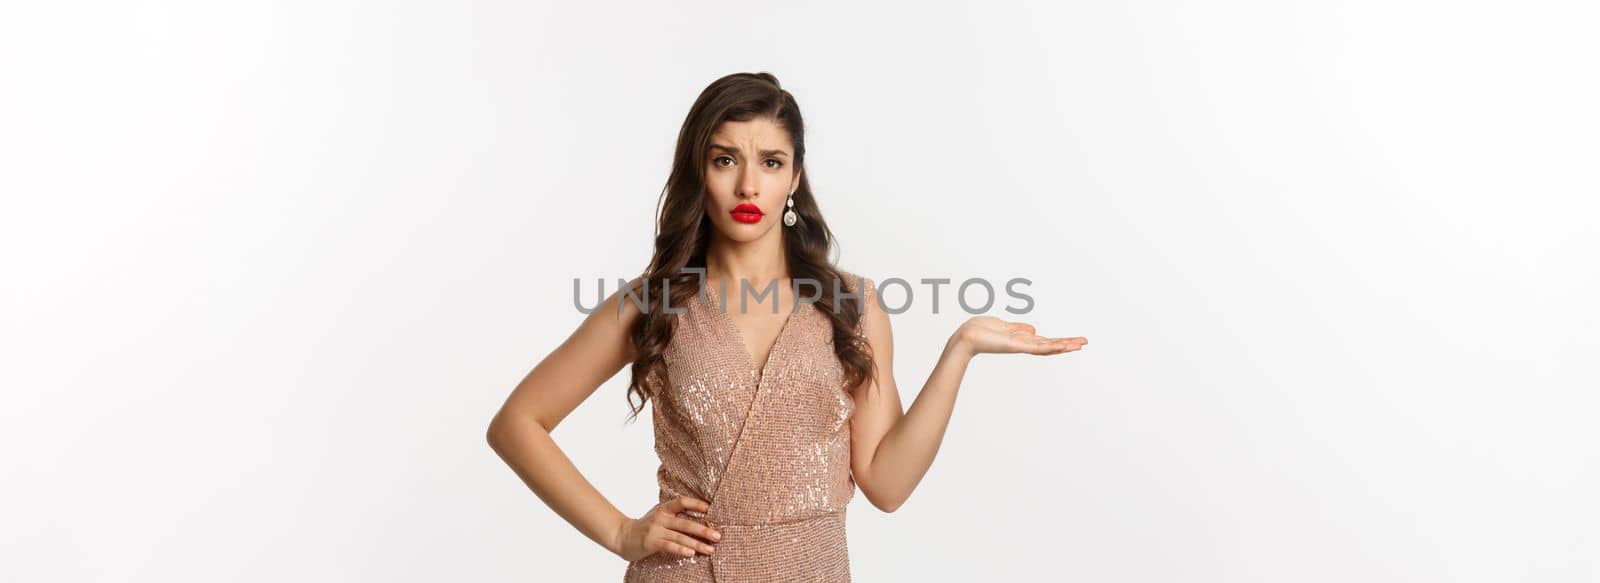 Unbothered young woman in elegant dress dont understand whats wrong, raising hand and looking careless, standing over white background.